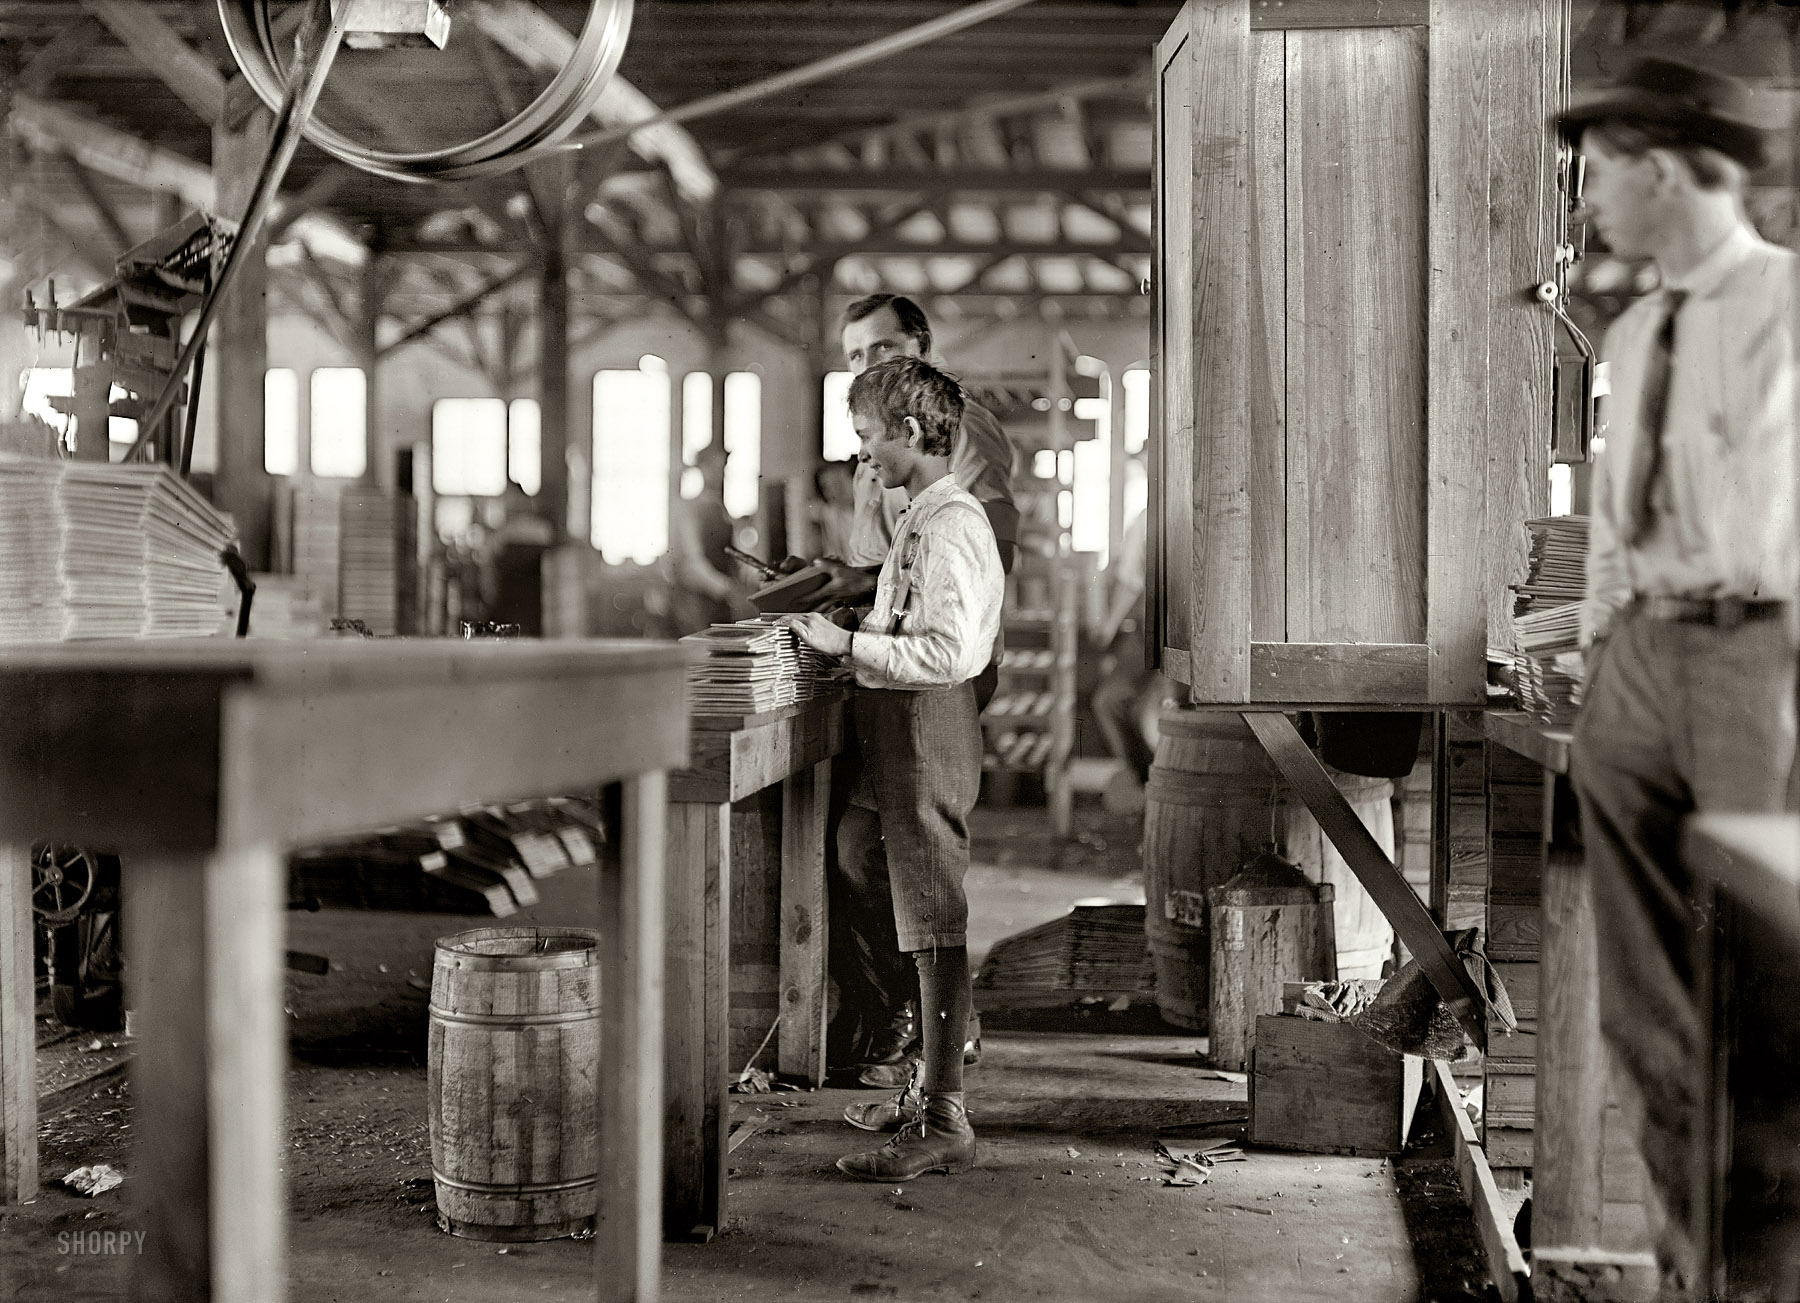 January 1909. "One of several youngsters I found in Tampa Cigar Box Factory. They are reported to have many children when work is rushing. About 10 young boys and girls, 300 employees." Photo by Lewis Wickes Hine. View full size.